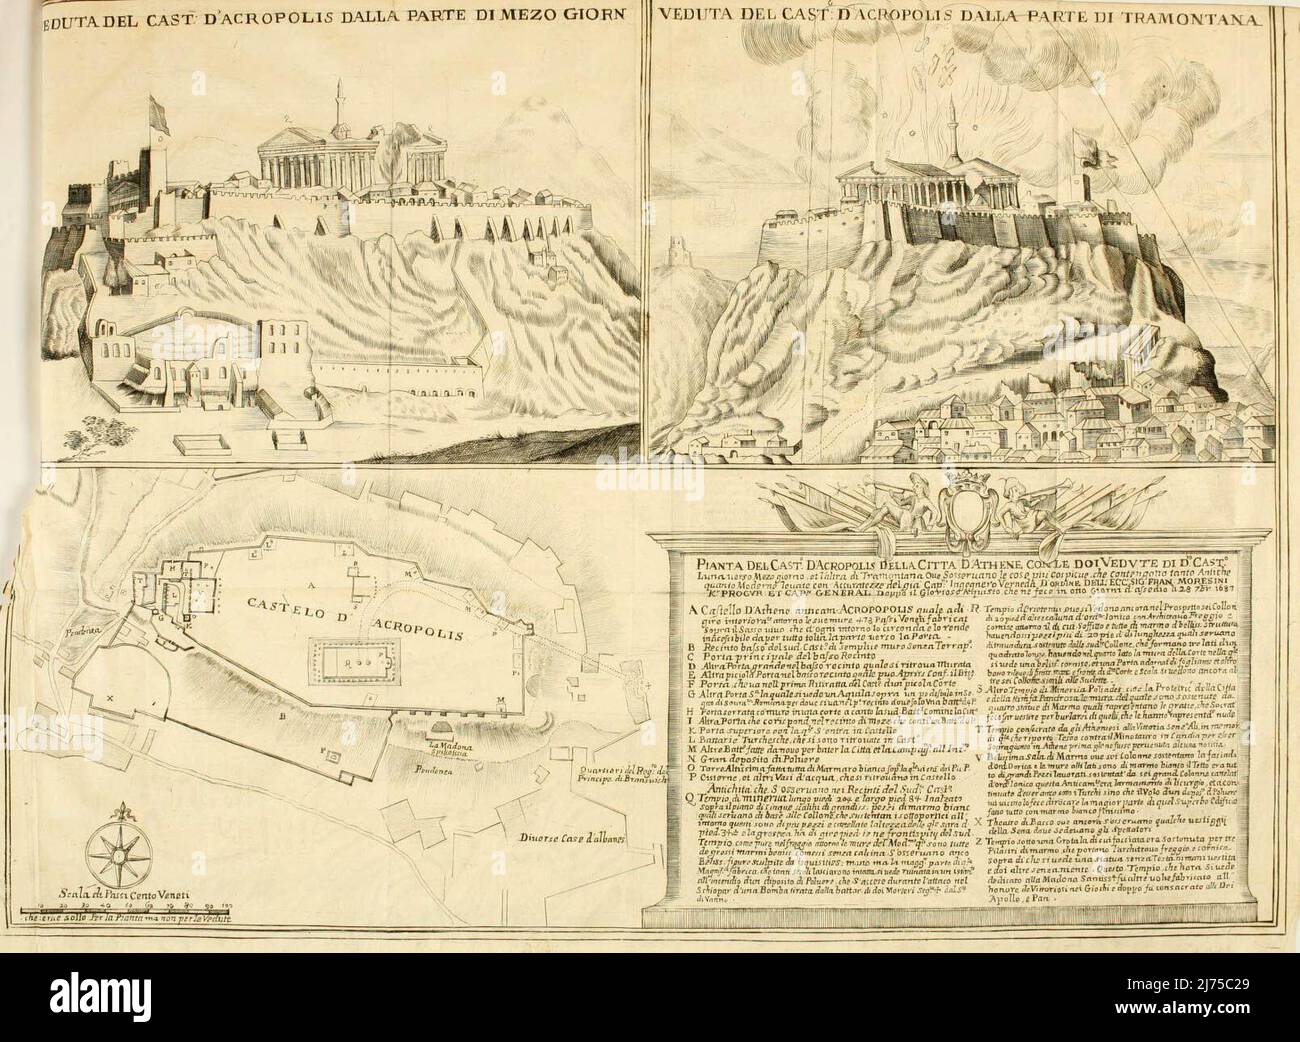 Plan of the Acropolis Castle in Athens. Print taken from: Attic Athens, described by its principles until the purchase made by the Venetian arms in 1687 Stock Photo